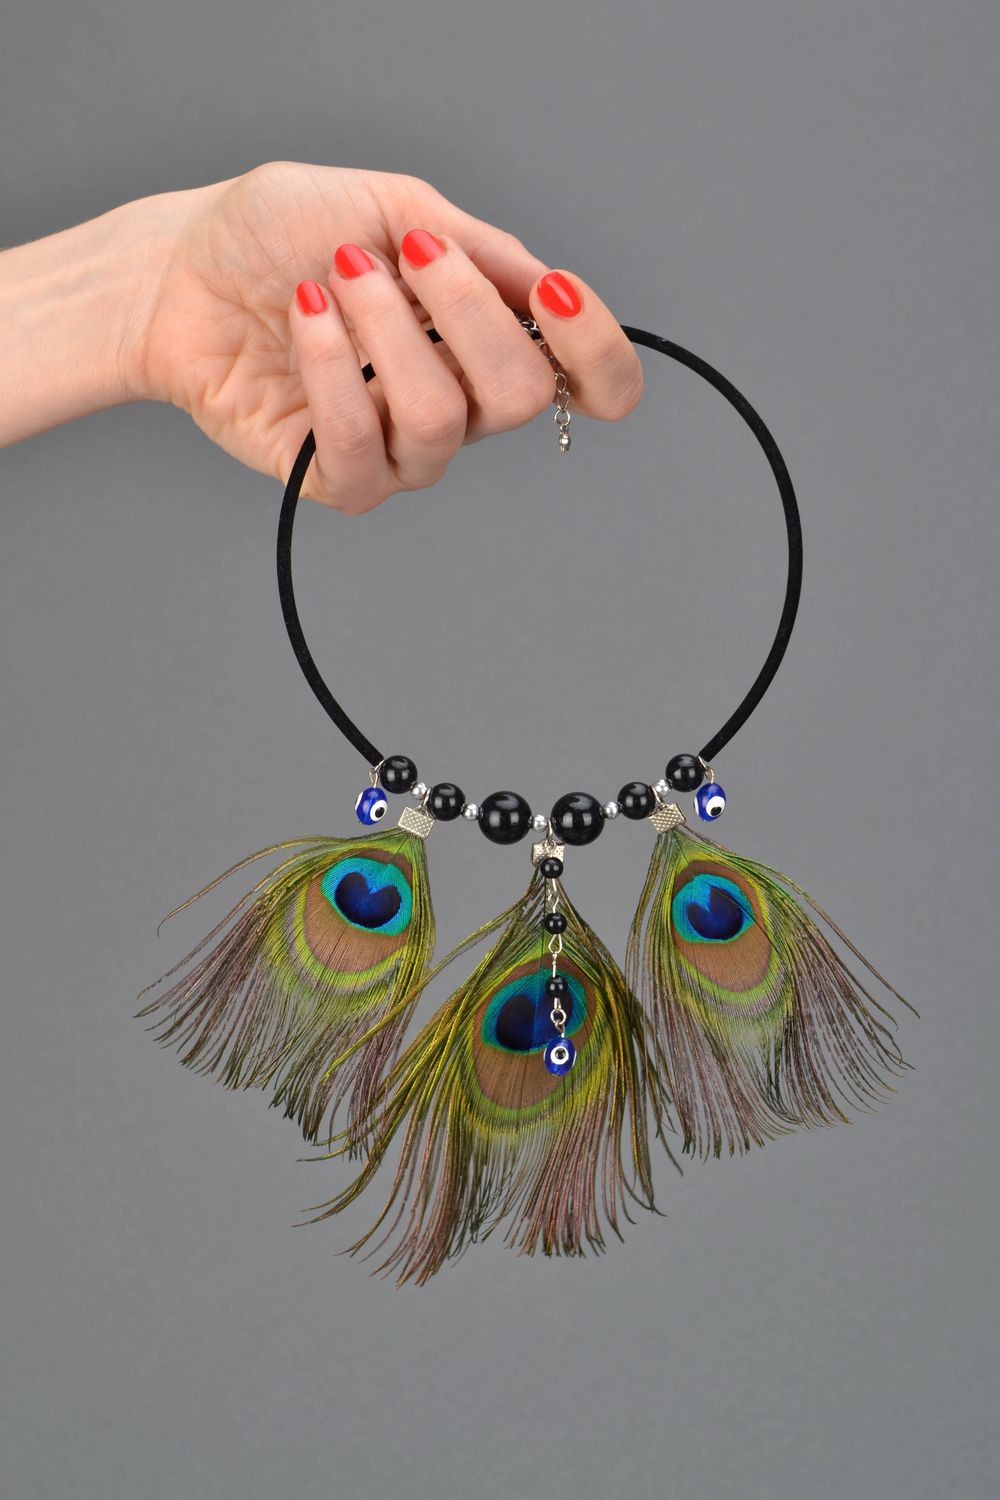 Homemade peacock feather necklace photo 2